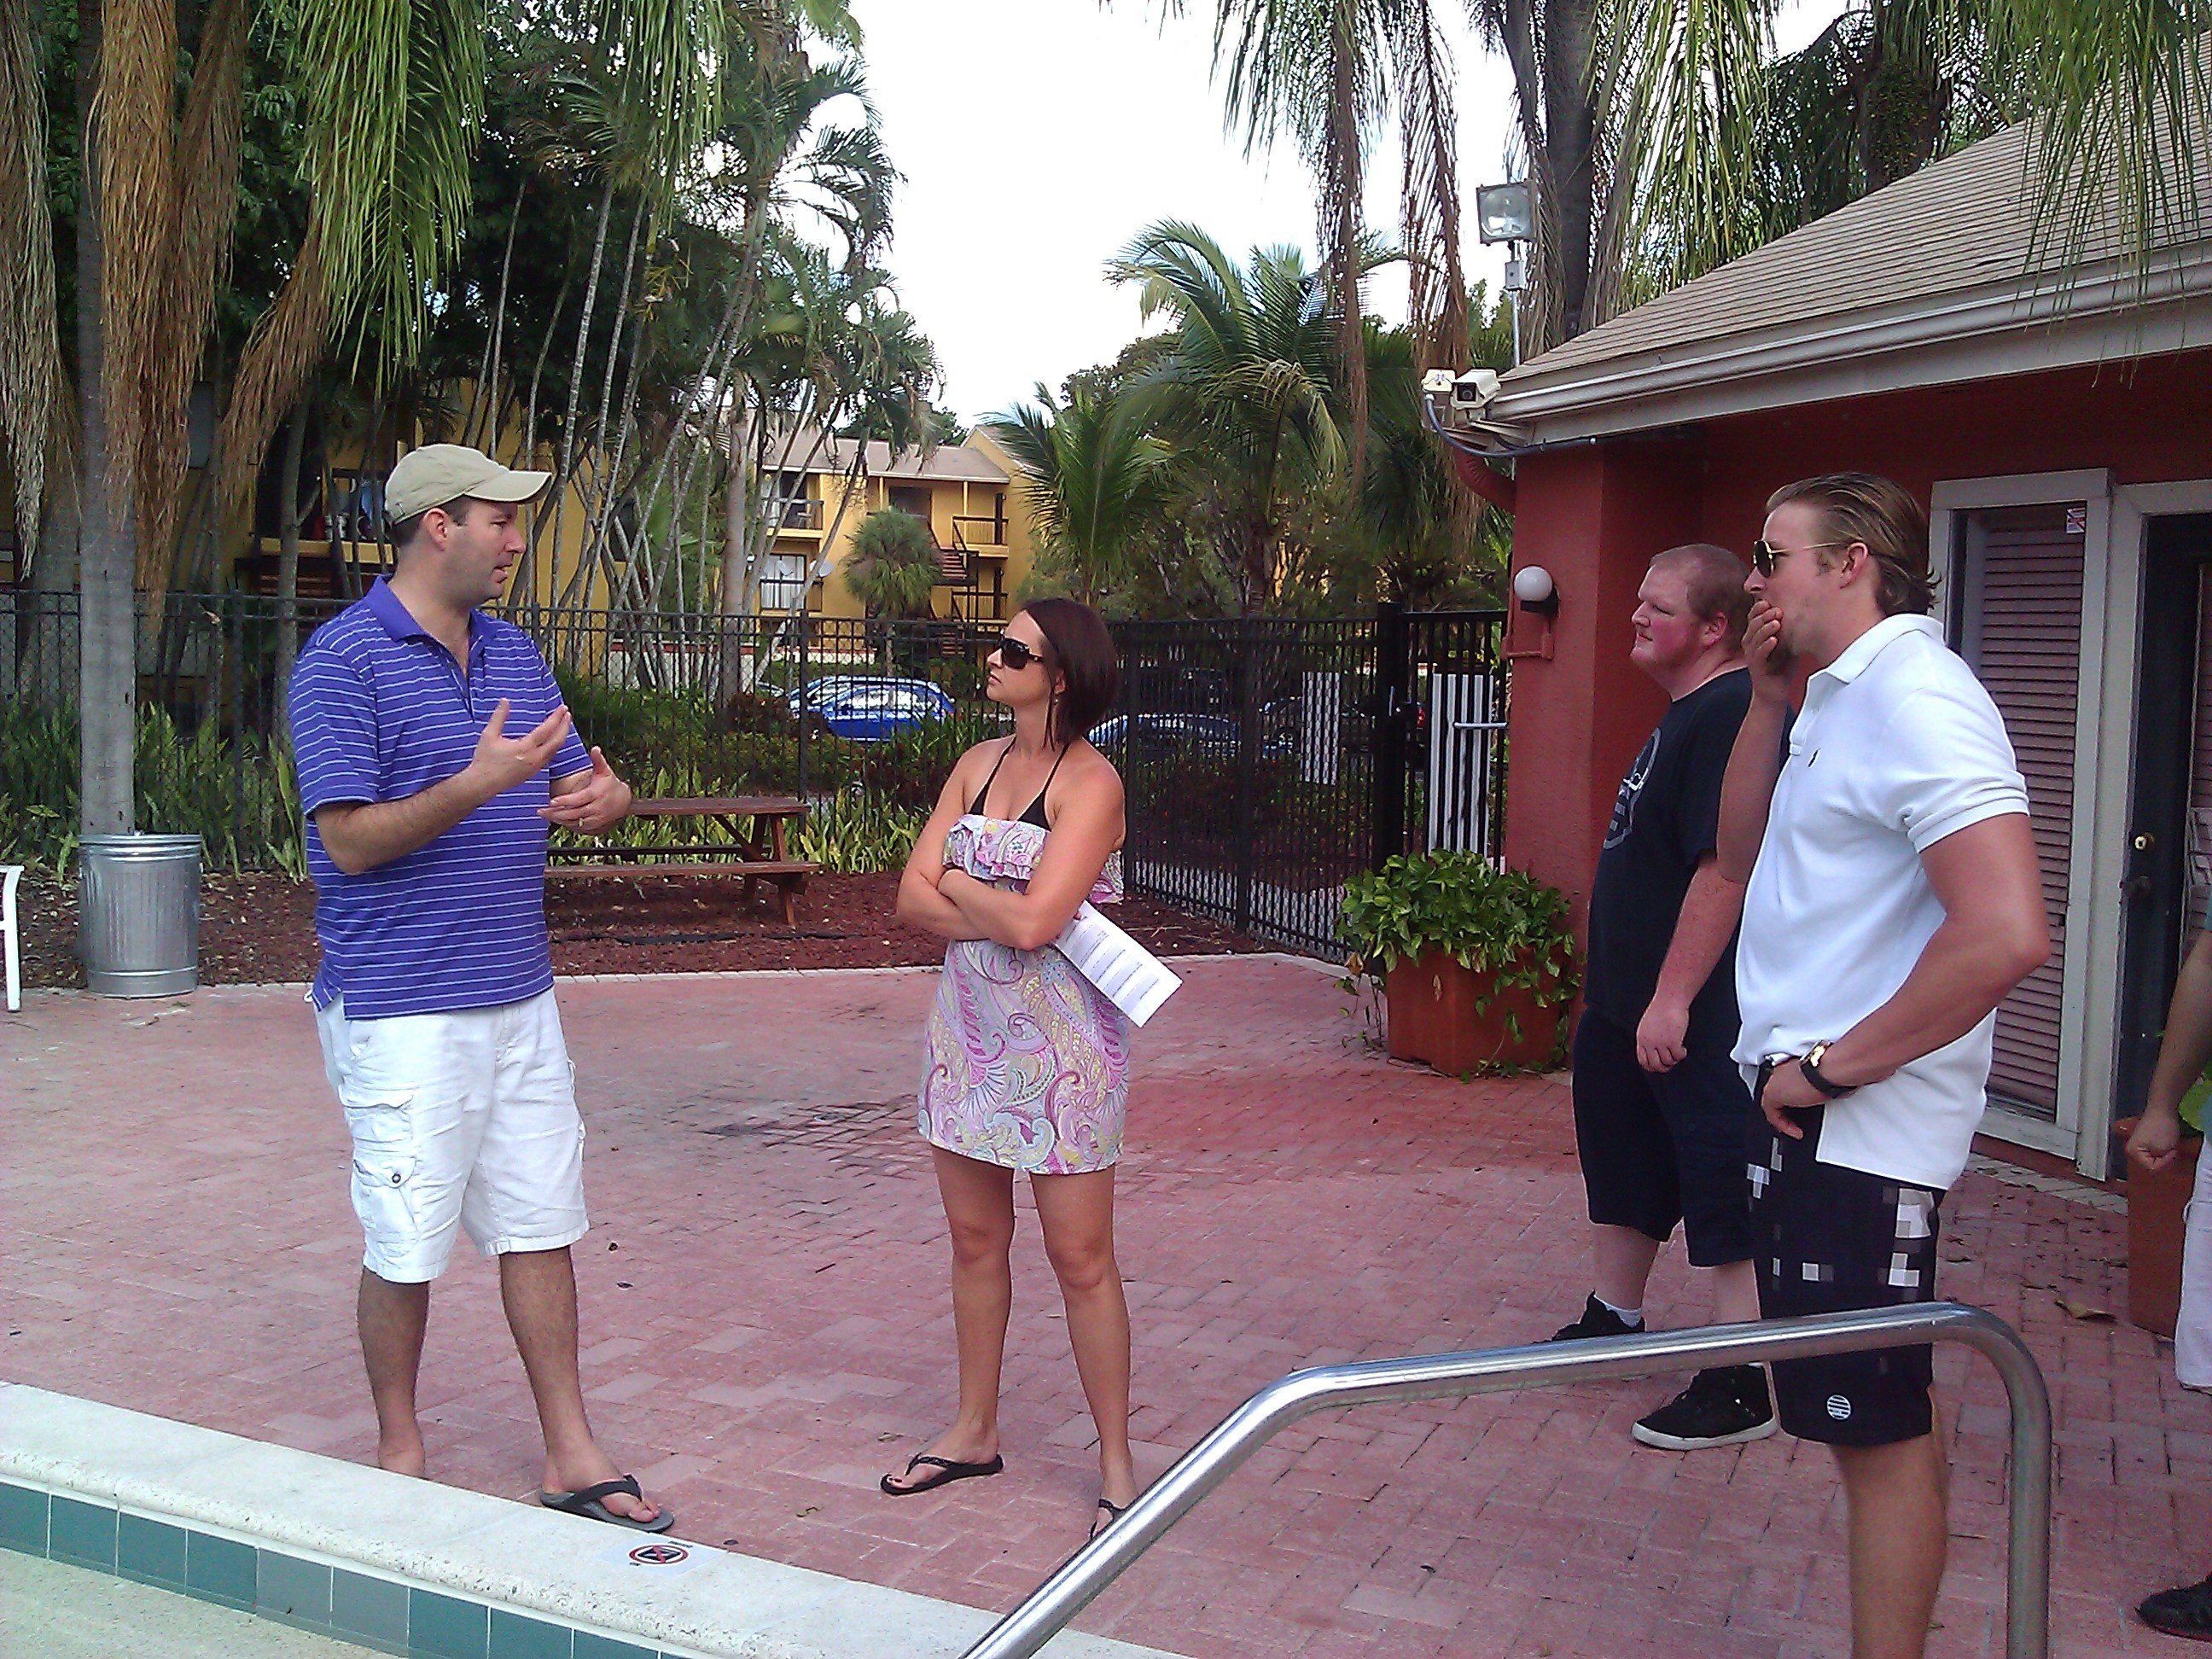 On the set of 'Her, Him & Them', filmed in Fort Myers, FL in 2013.